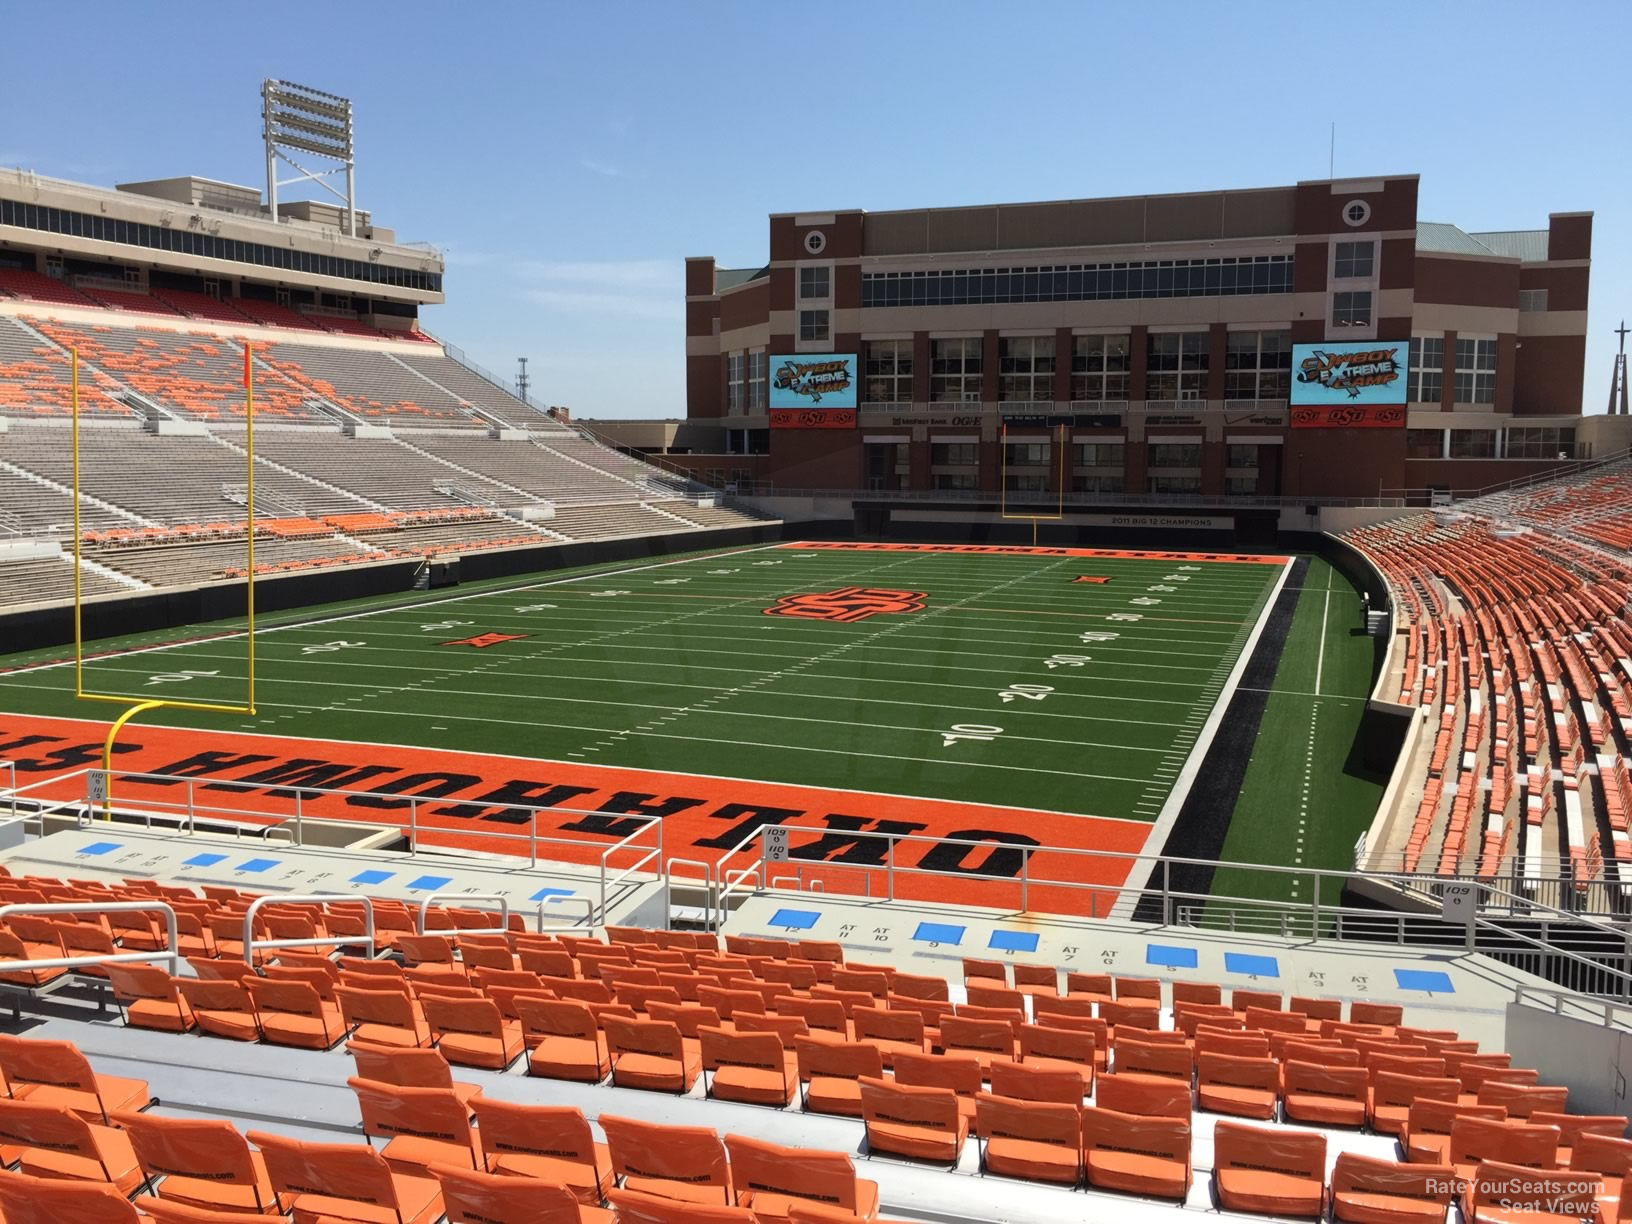 section 213, row 20 seat view  - boone pickens stadium